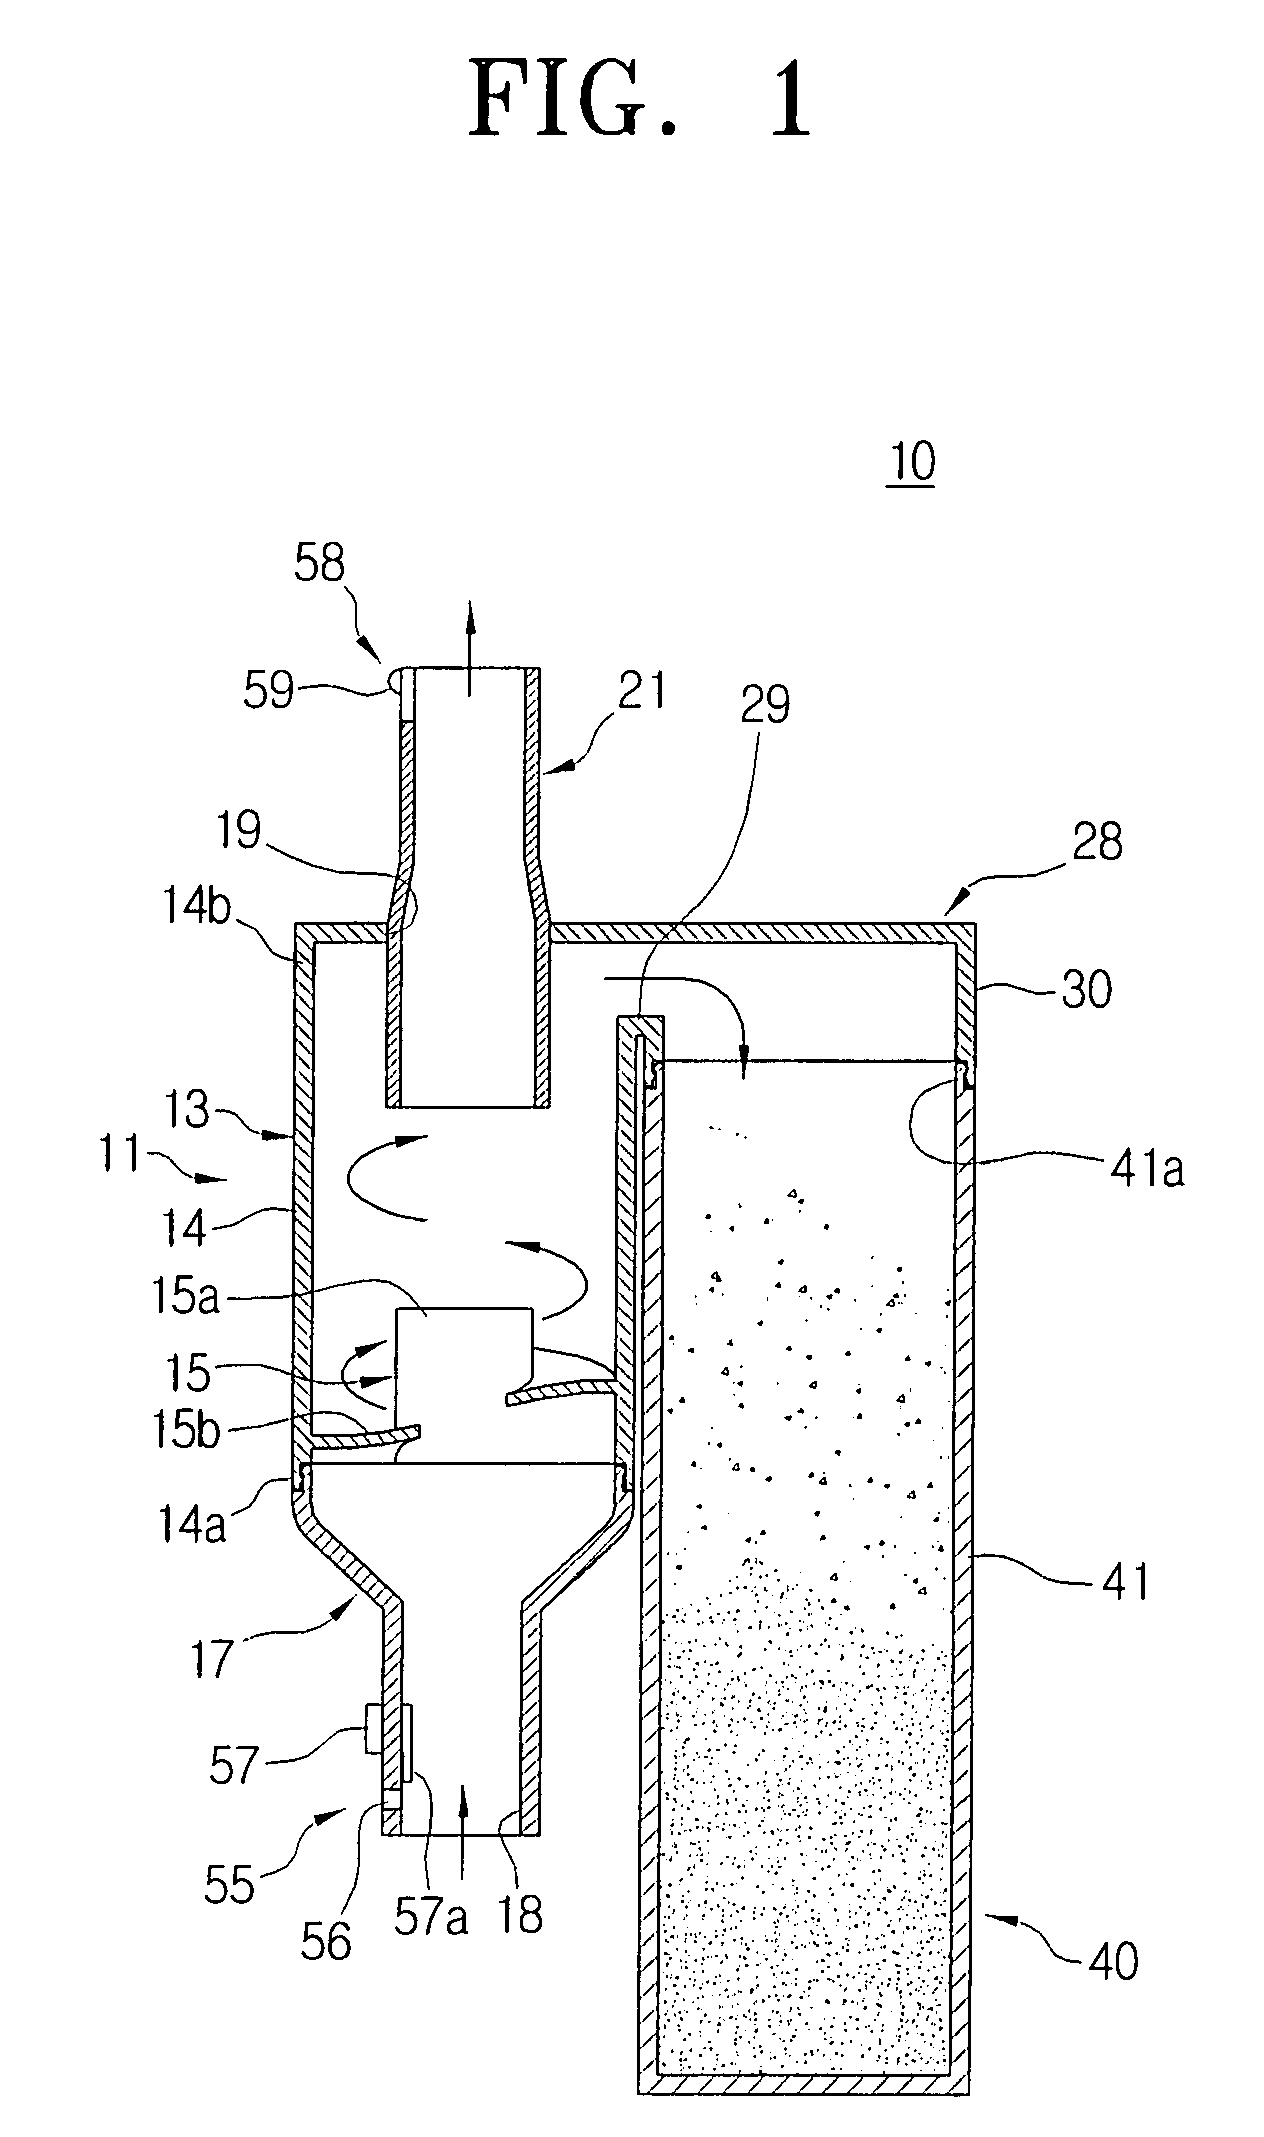 Cyclone dust-separating unit for use in vacuum cleaner